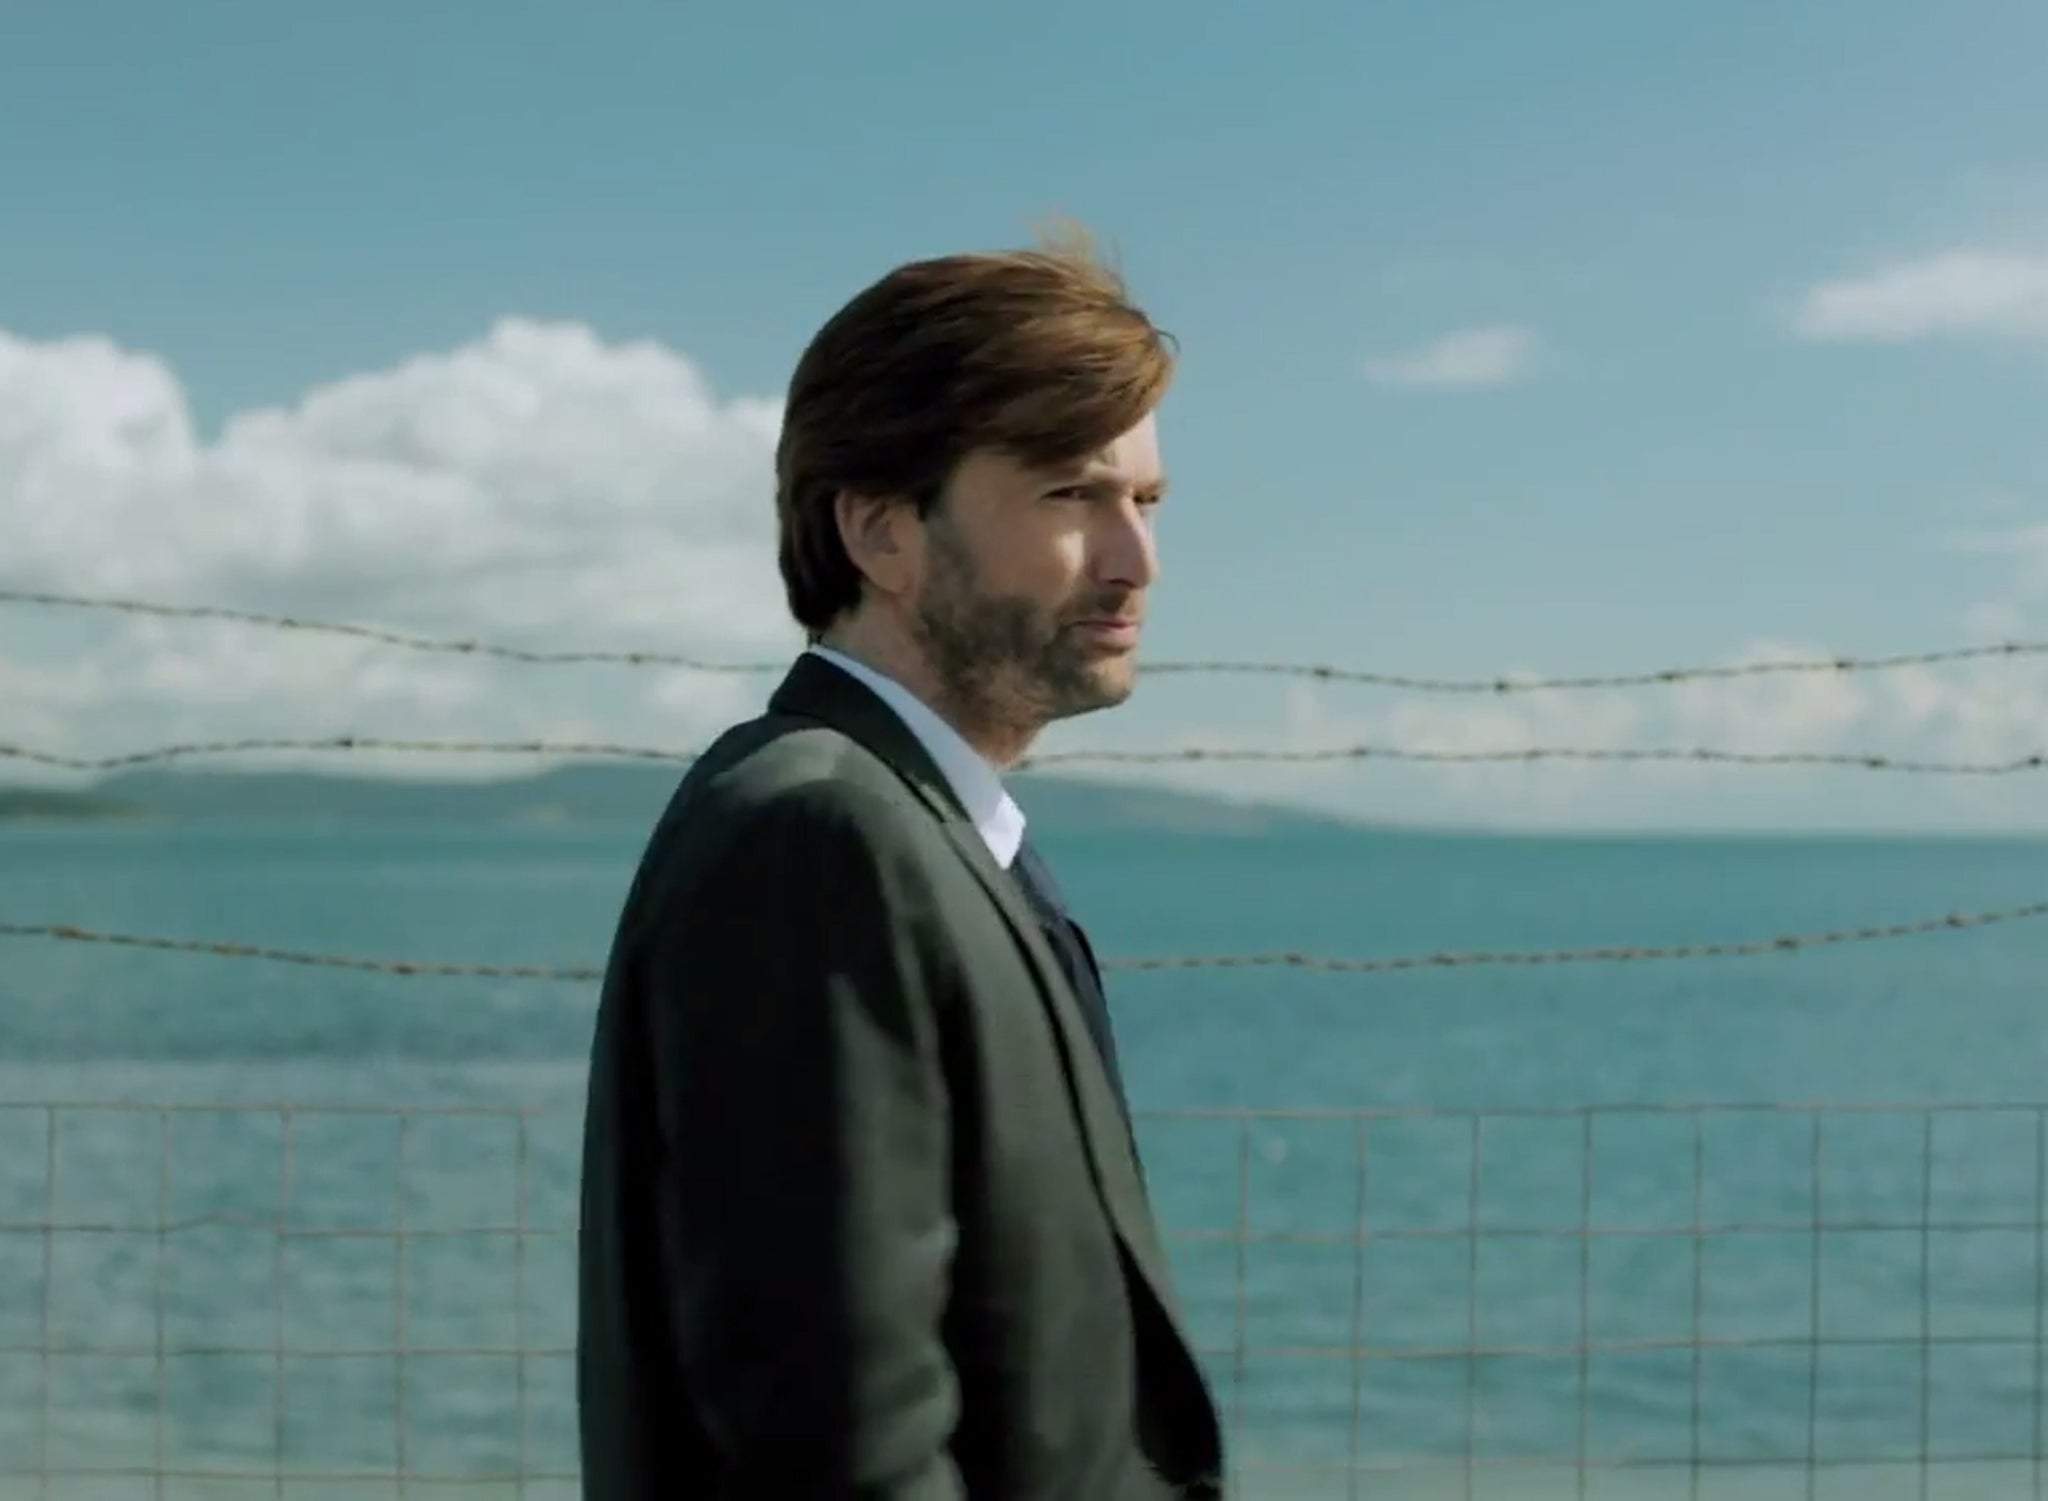 David Tennant plays Detective Emmett Carver in the US version on Broadchurch